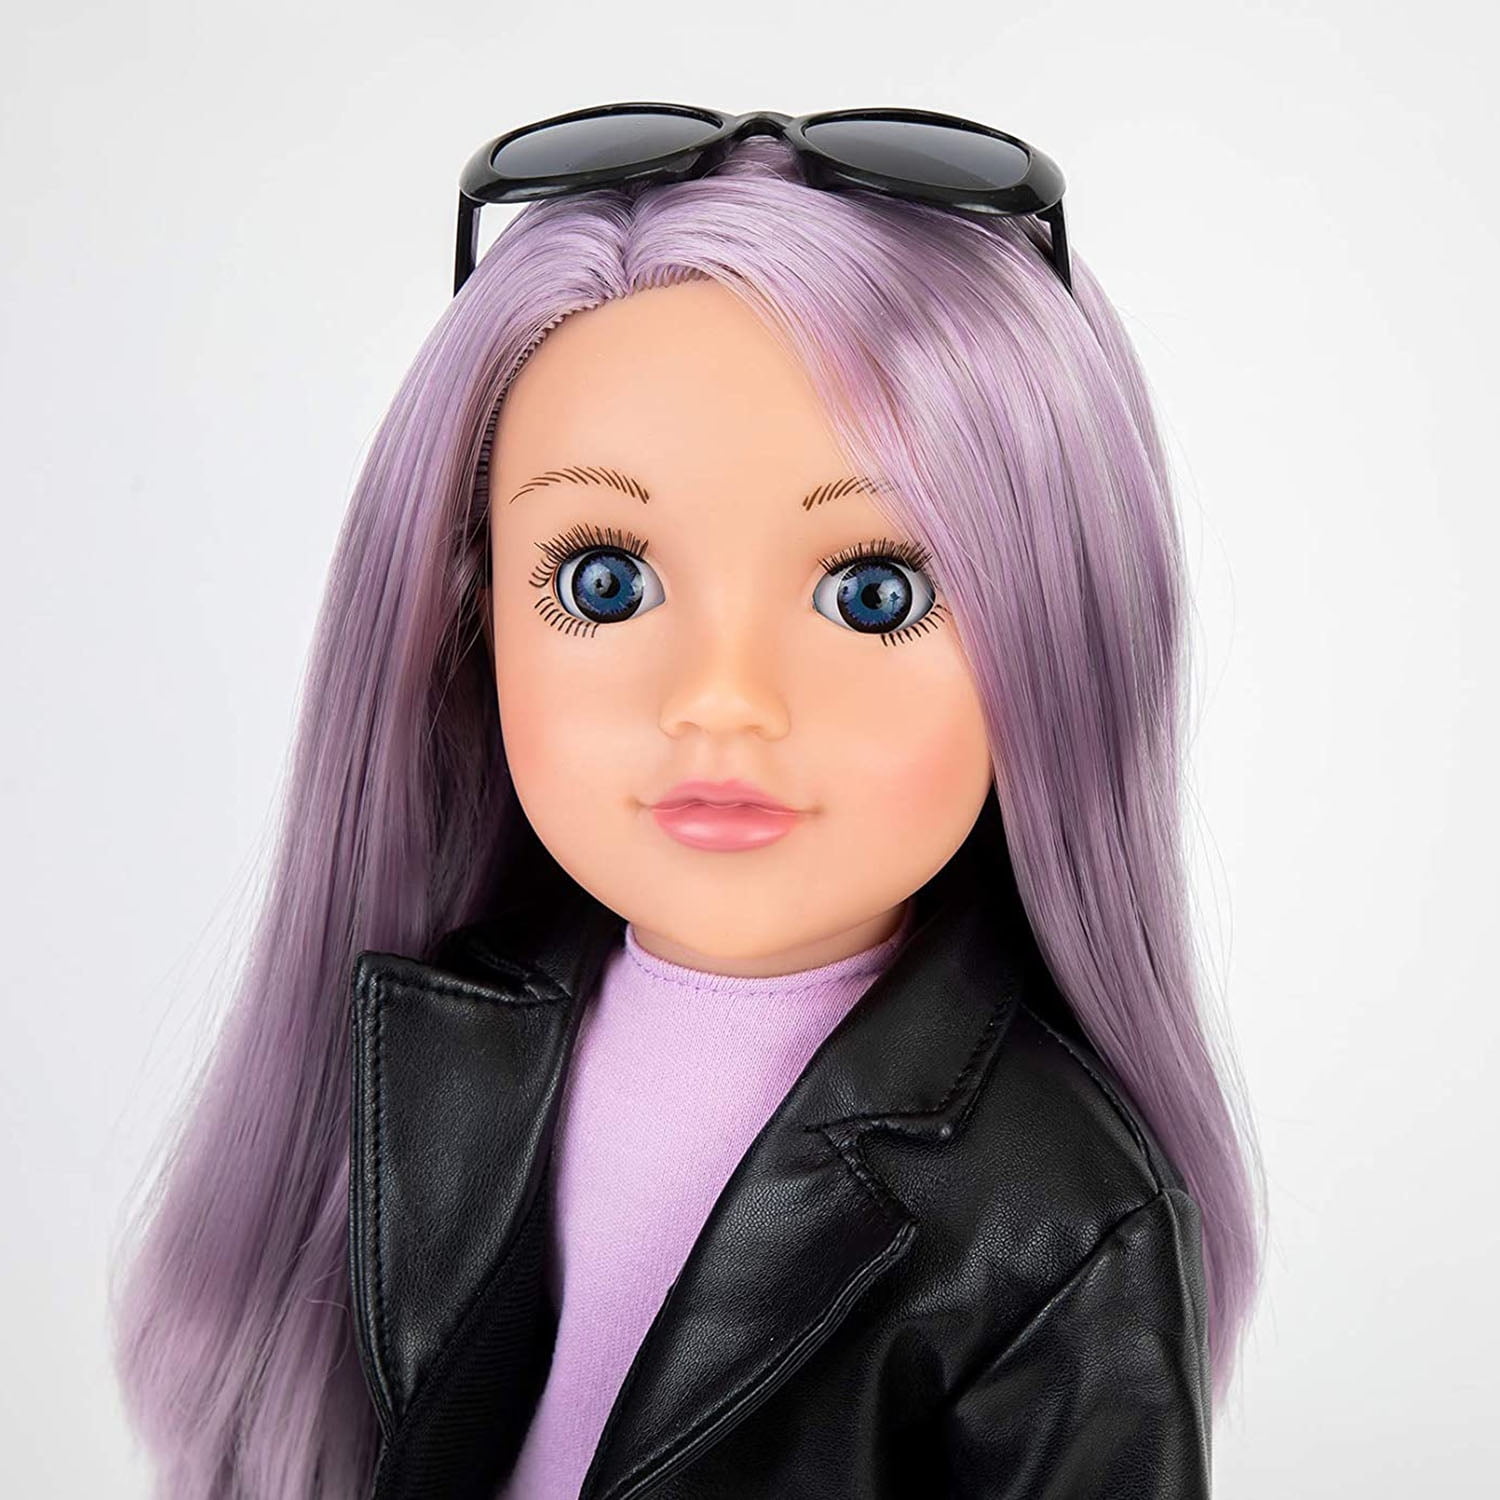 Designafriend Skye Doll Beautifully Packaged In Boutique Style Gift 18inch/45cm 